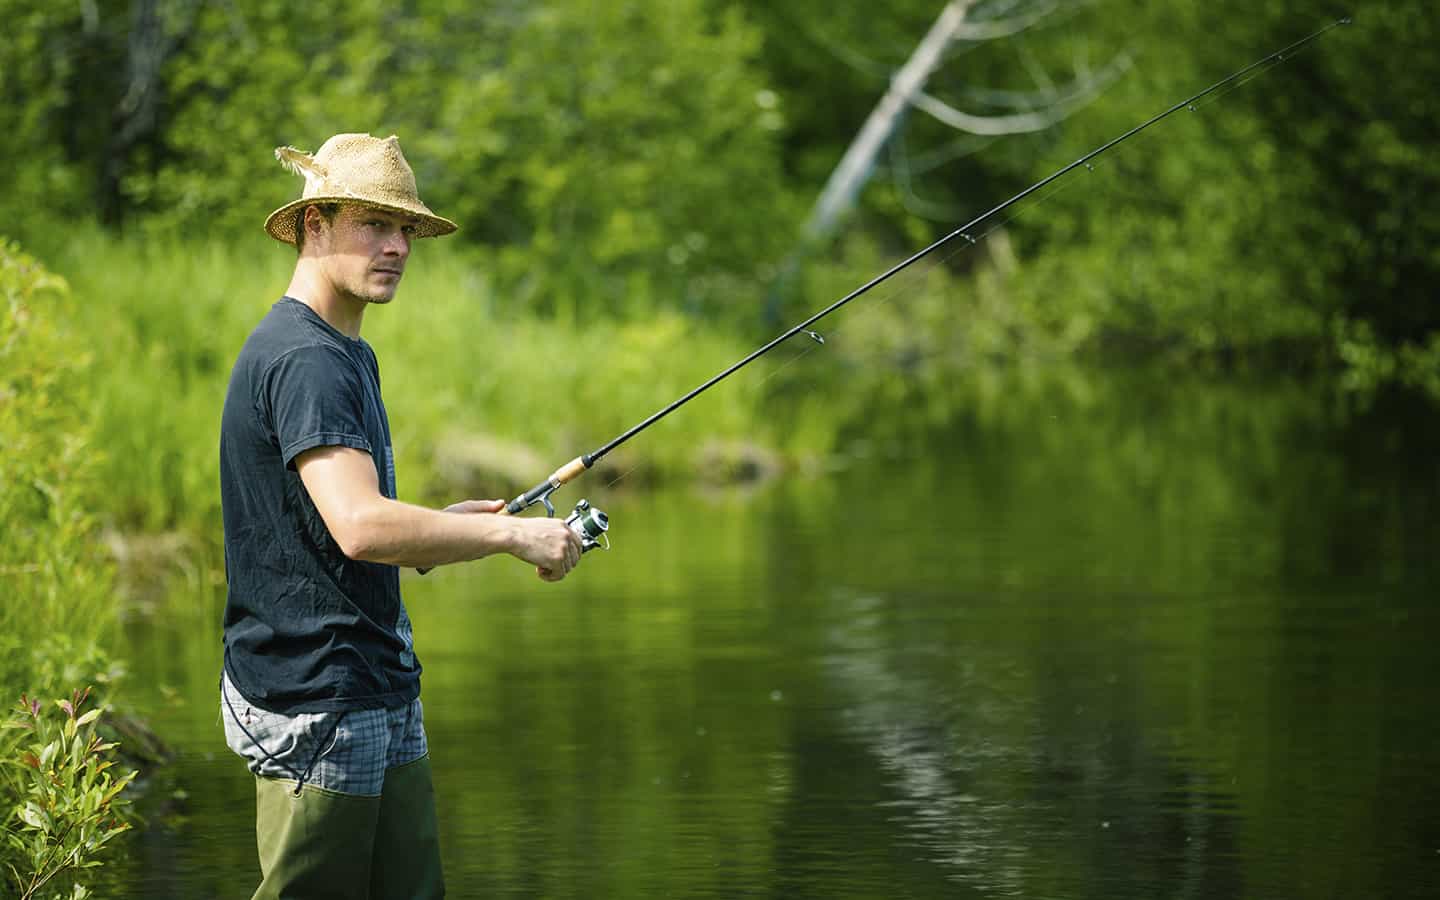 Encouraging us to get outdoors, province extends free family fishing week